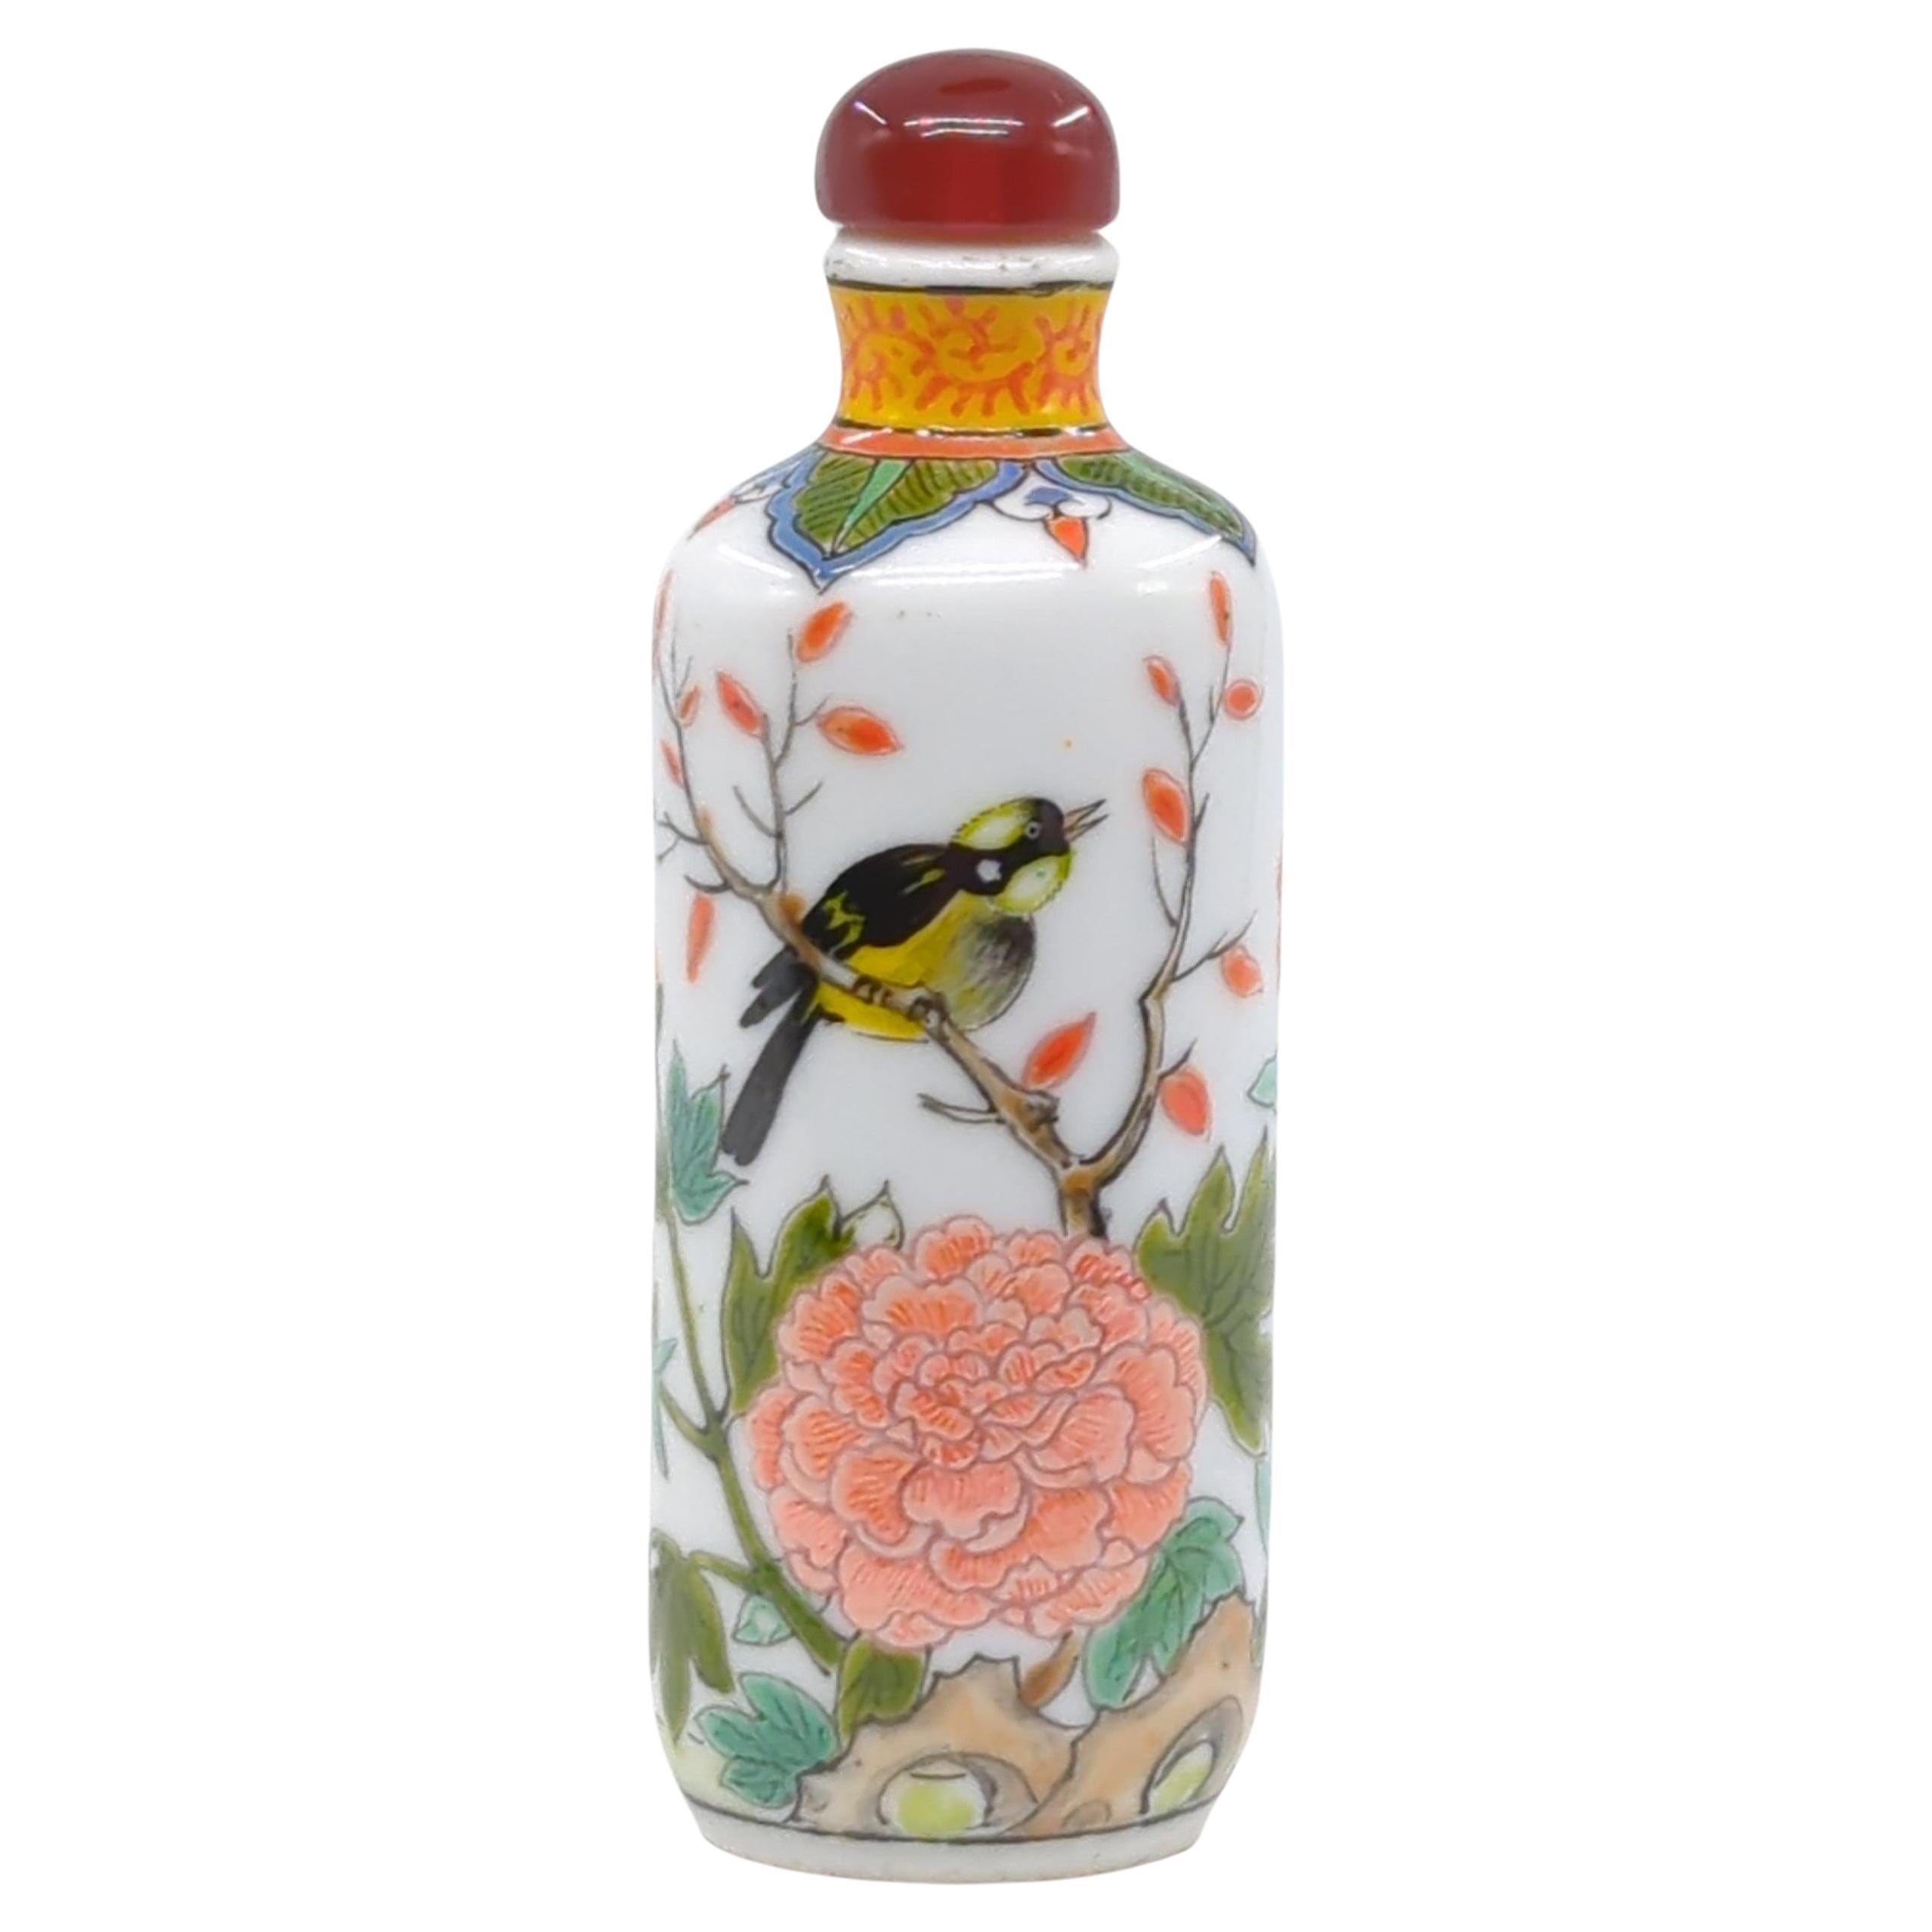 This vintage Chinese snuff bottle from the Republic of China period is a charming example of famille rose porcelain, renowned for its soft, pastel hues. The bottle is hand-painted with a delightful scene of birds amidst a lush garden, complete with